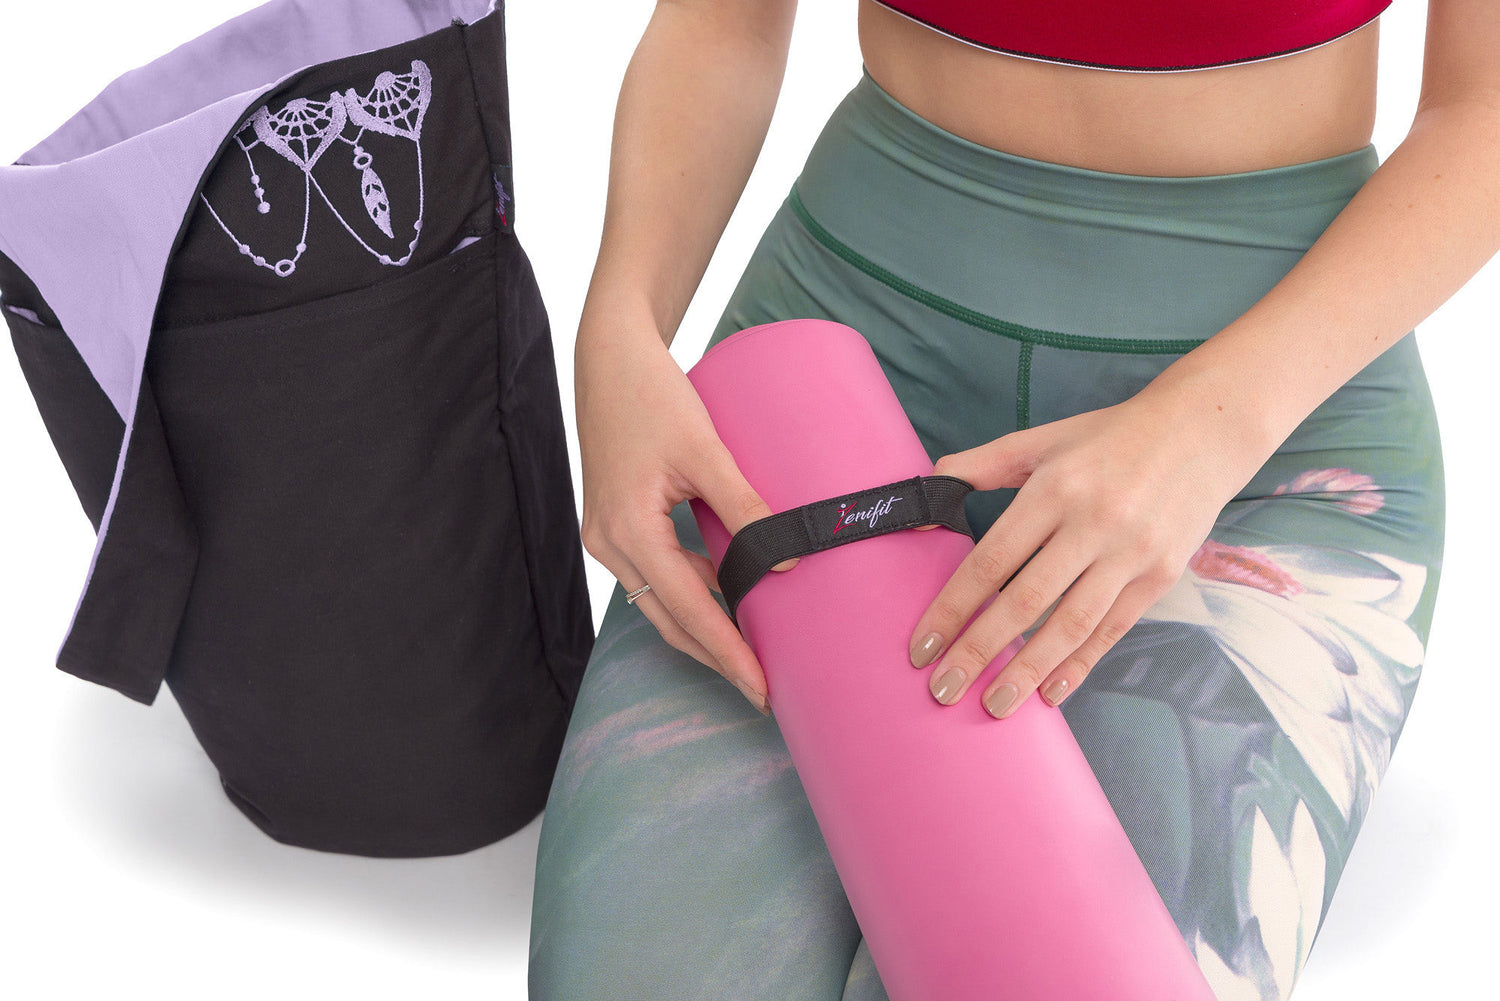 women putting included straps on yoga mat on her knees with yoga bag next to her